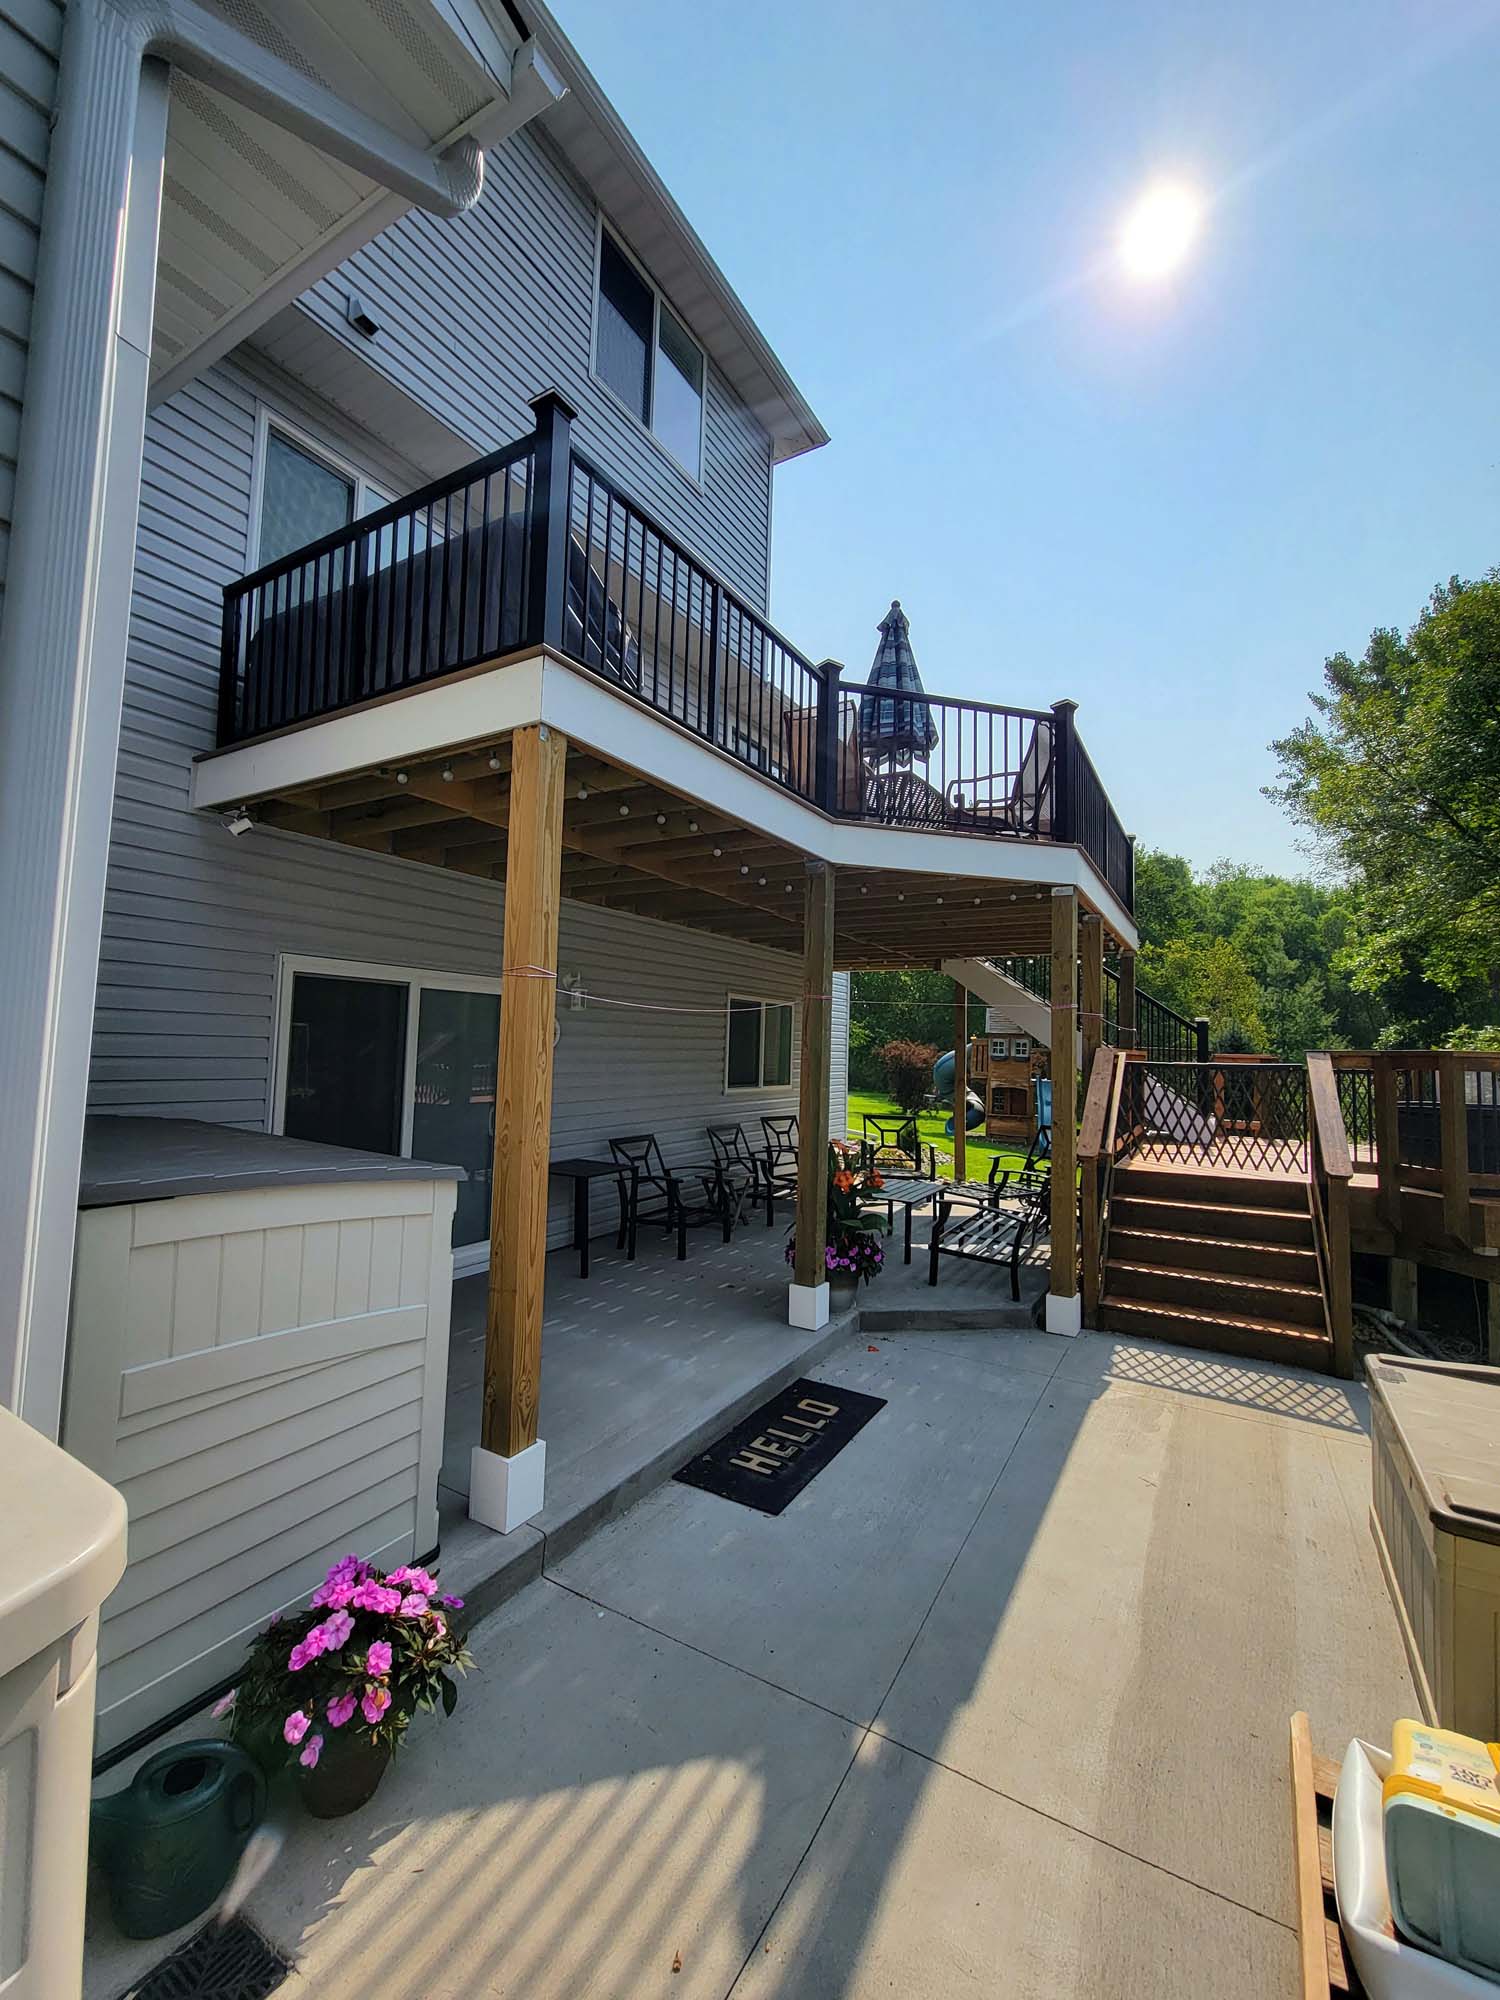 New deck with stairs to patio